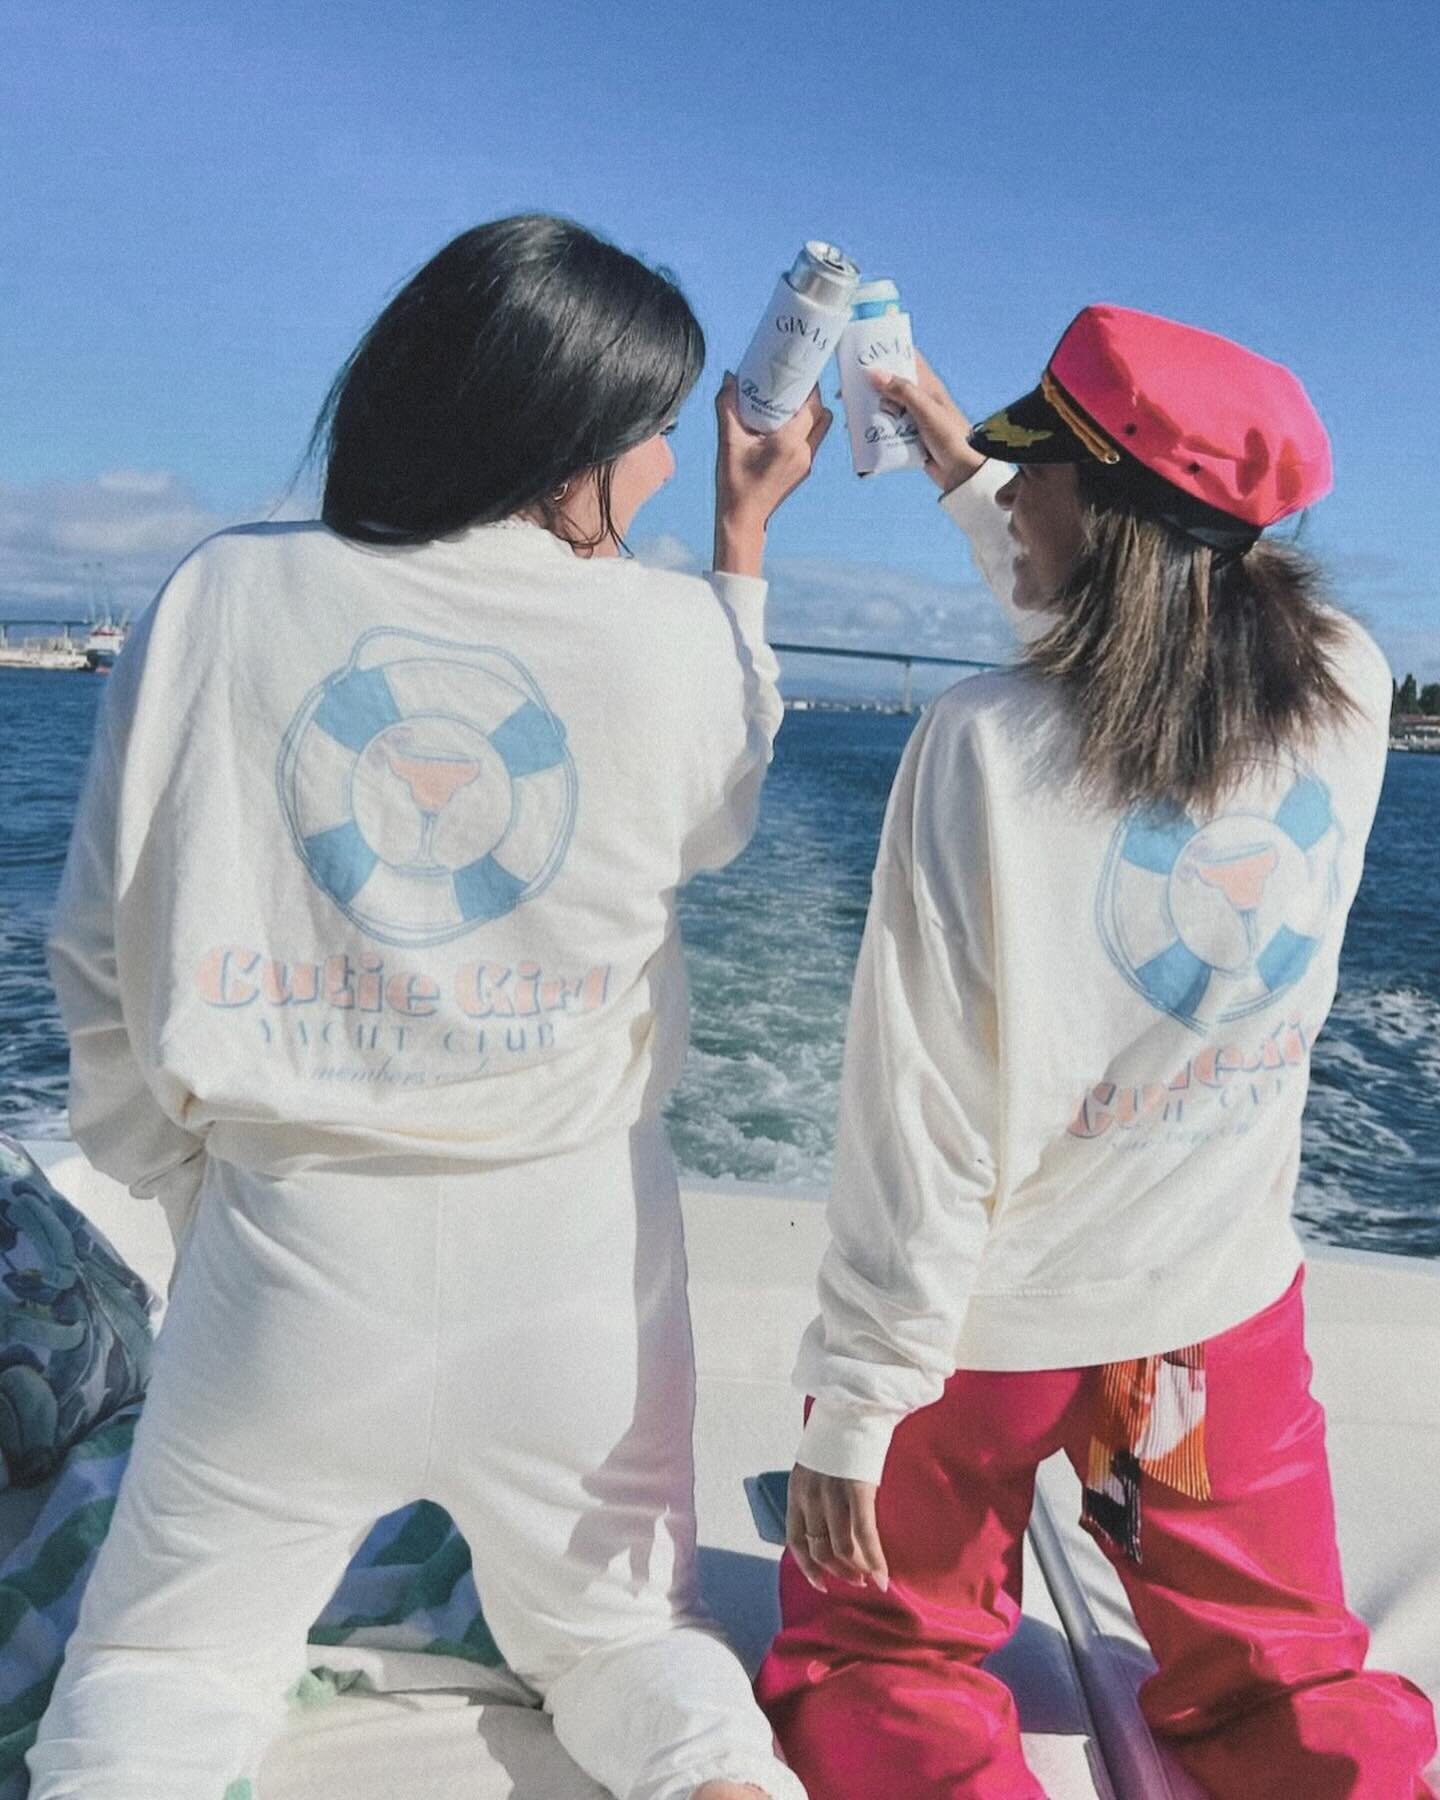 NGL&hellip; I want to join the cutie girl yacht club! @just.ginamarie went above and beyond with everything she put her custom design on 😍✨🛟

#tshirtbusiness #tshirtdesigner #customtshirt #bachelorettetshirt #customdesign #customtees #bachelorettep